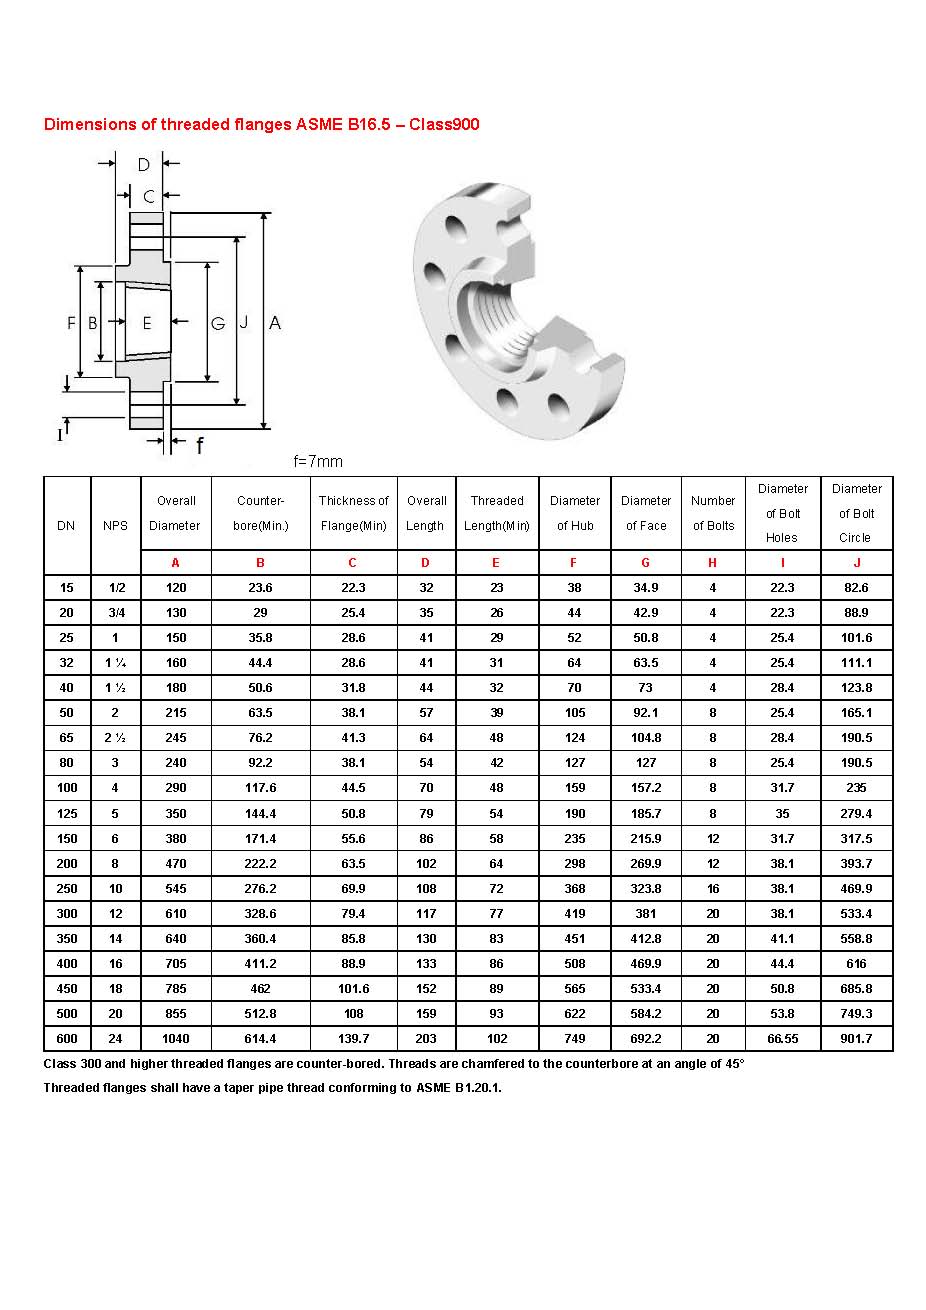 Dimensions of threaded flanges ASME B16.5 class900